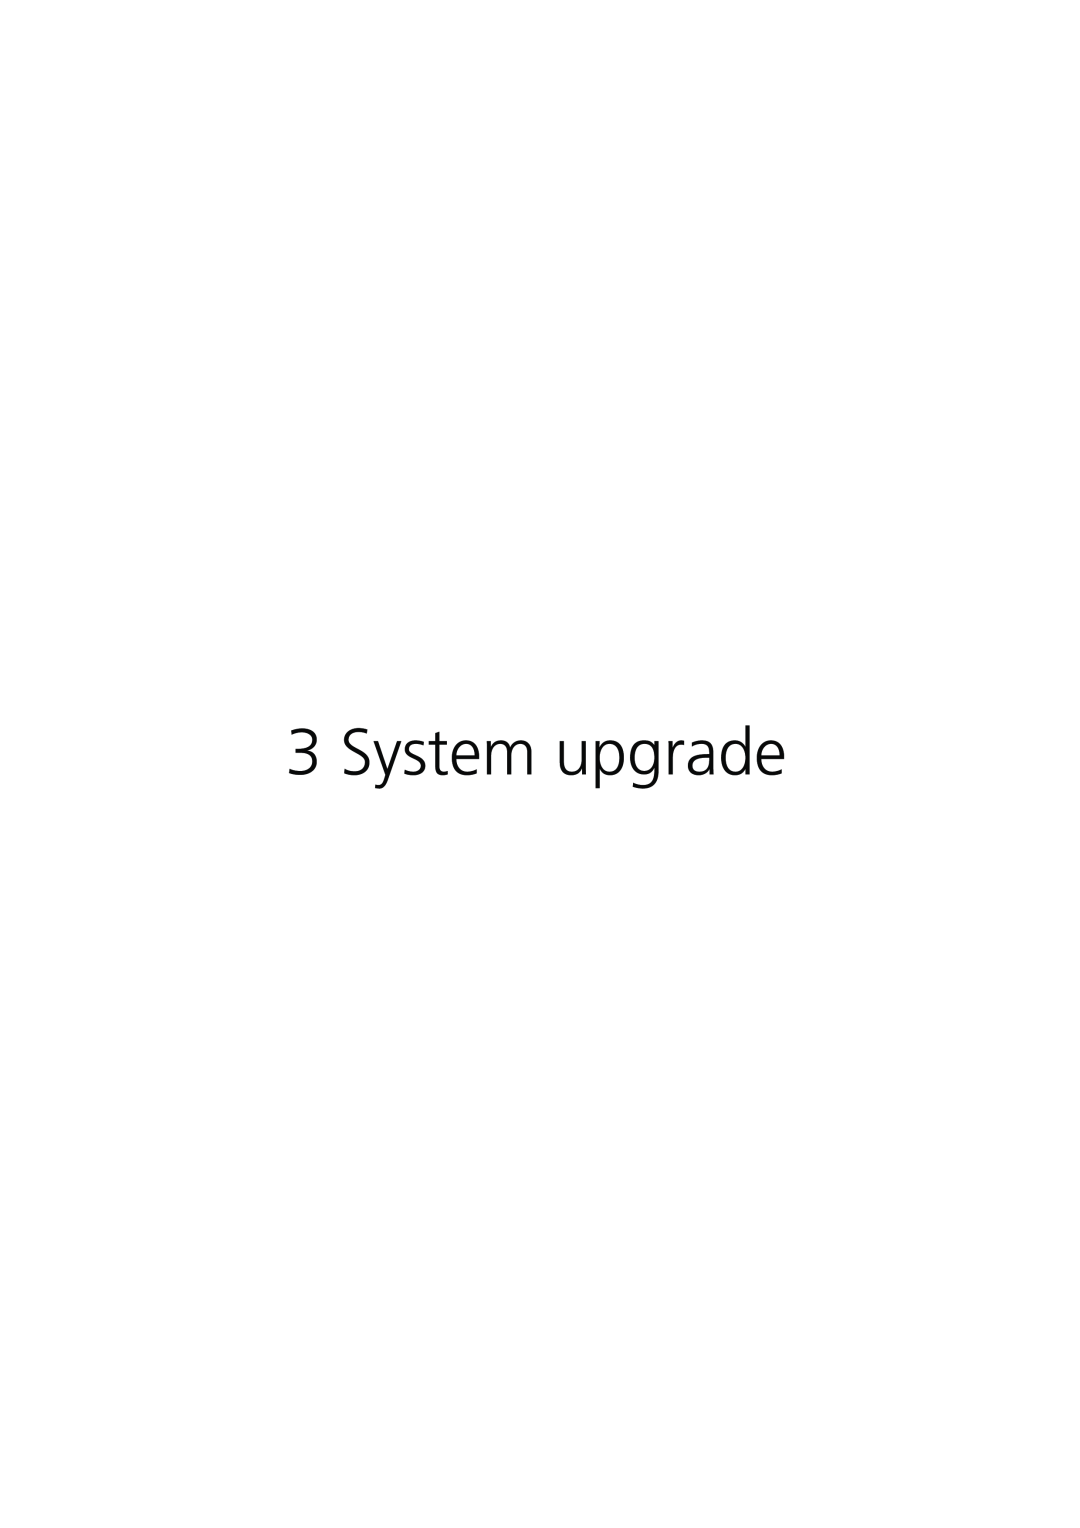 Acer R720 Series manual System upgrade 